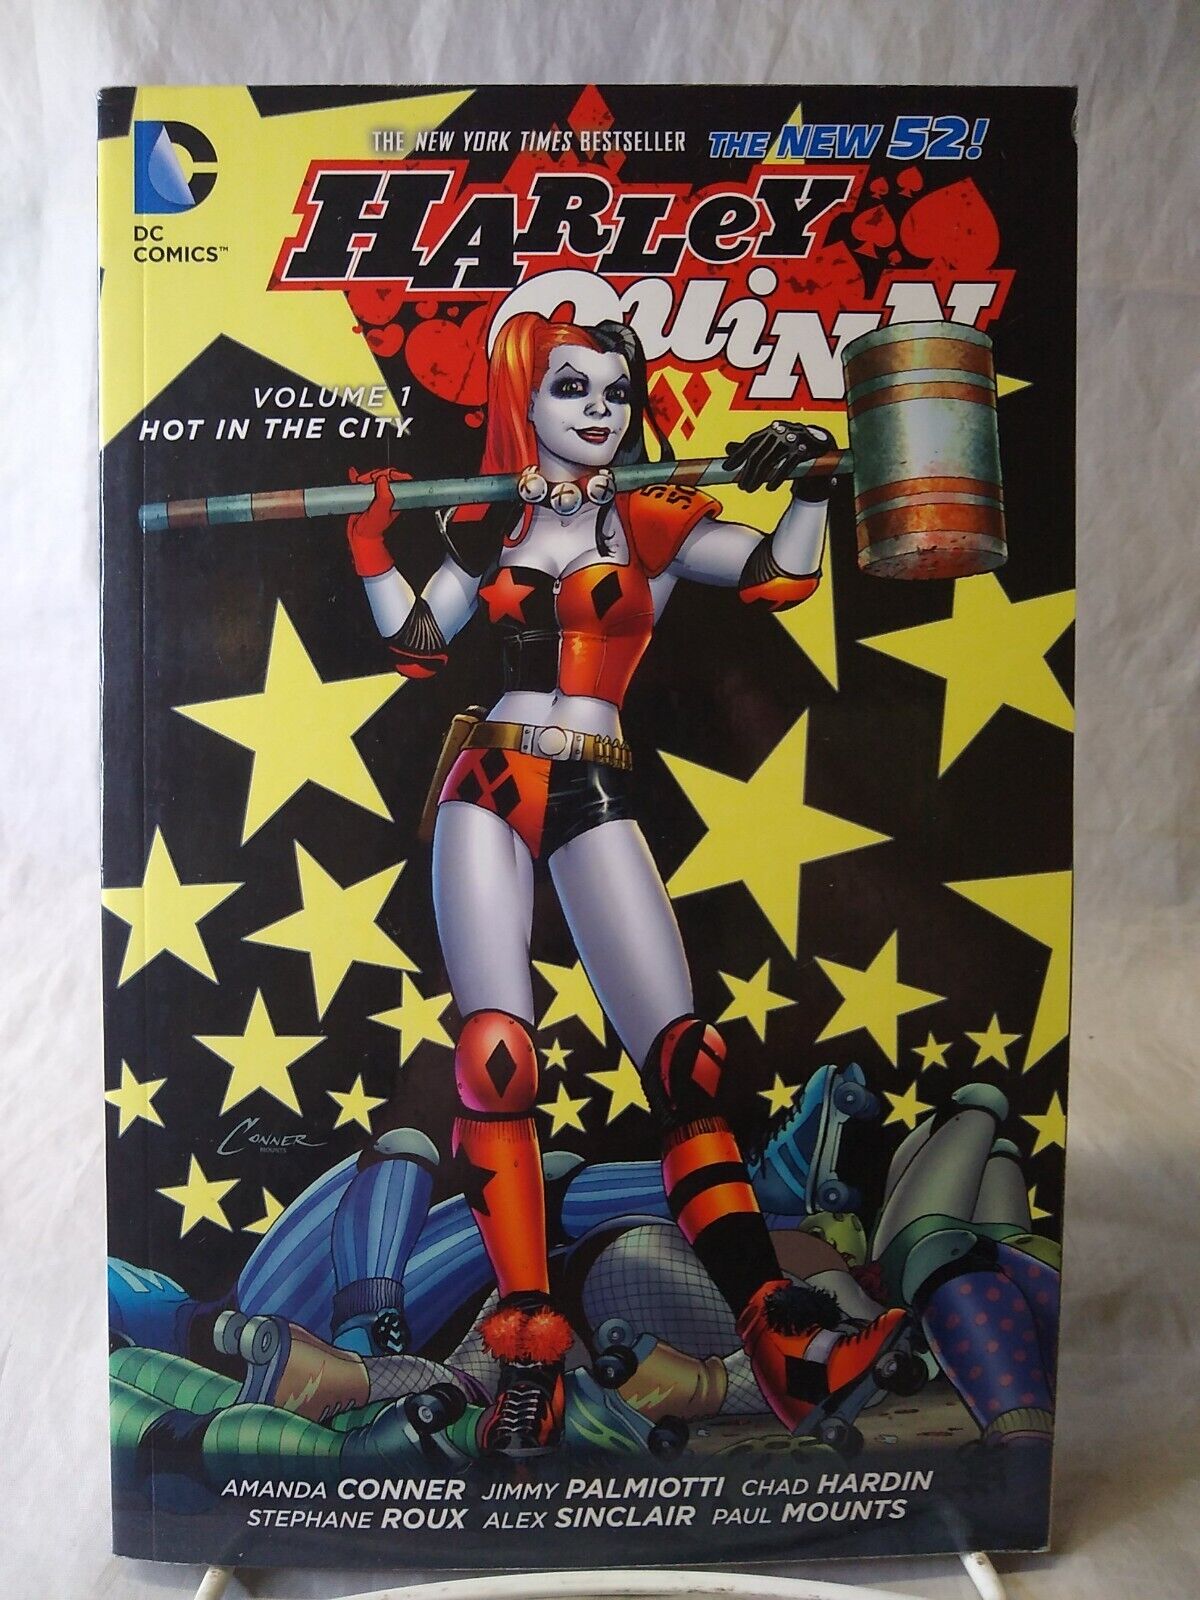 DC Comics Harley Quinn Vol. 1: Hot in the City The New 52 Trade Paperback 